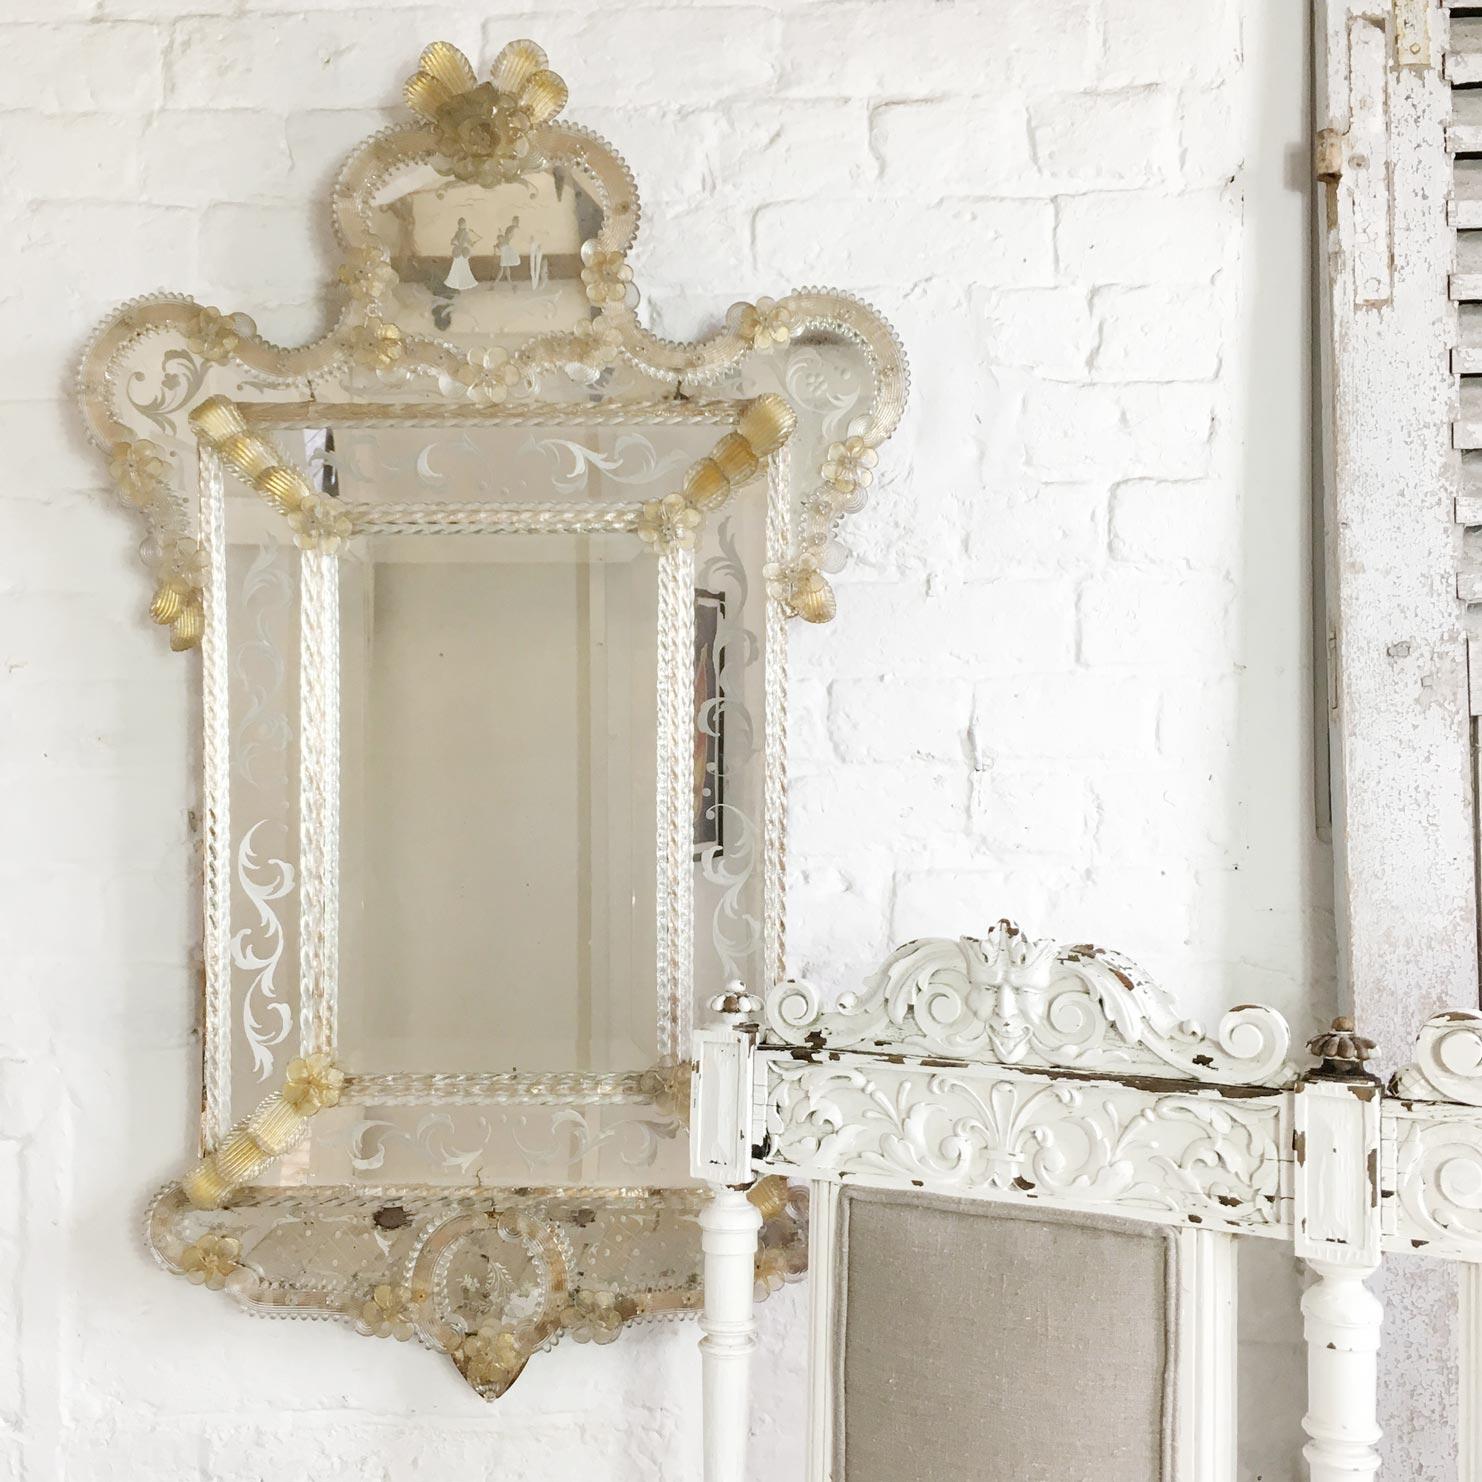 Italian Venetian Murano glass mirror circa 1930

Highly decorative wall mirror, handcrafted with handblown Murano glass.

This is a double bordered mirror, with hand twisted glass rods surrounding the adjoining etched mirror panels

The mirror